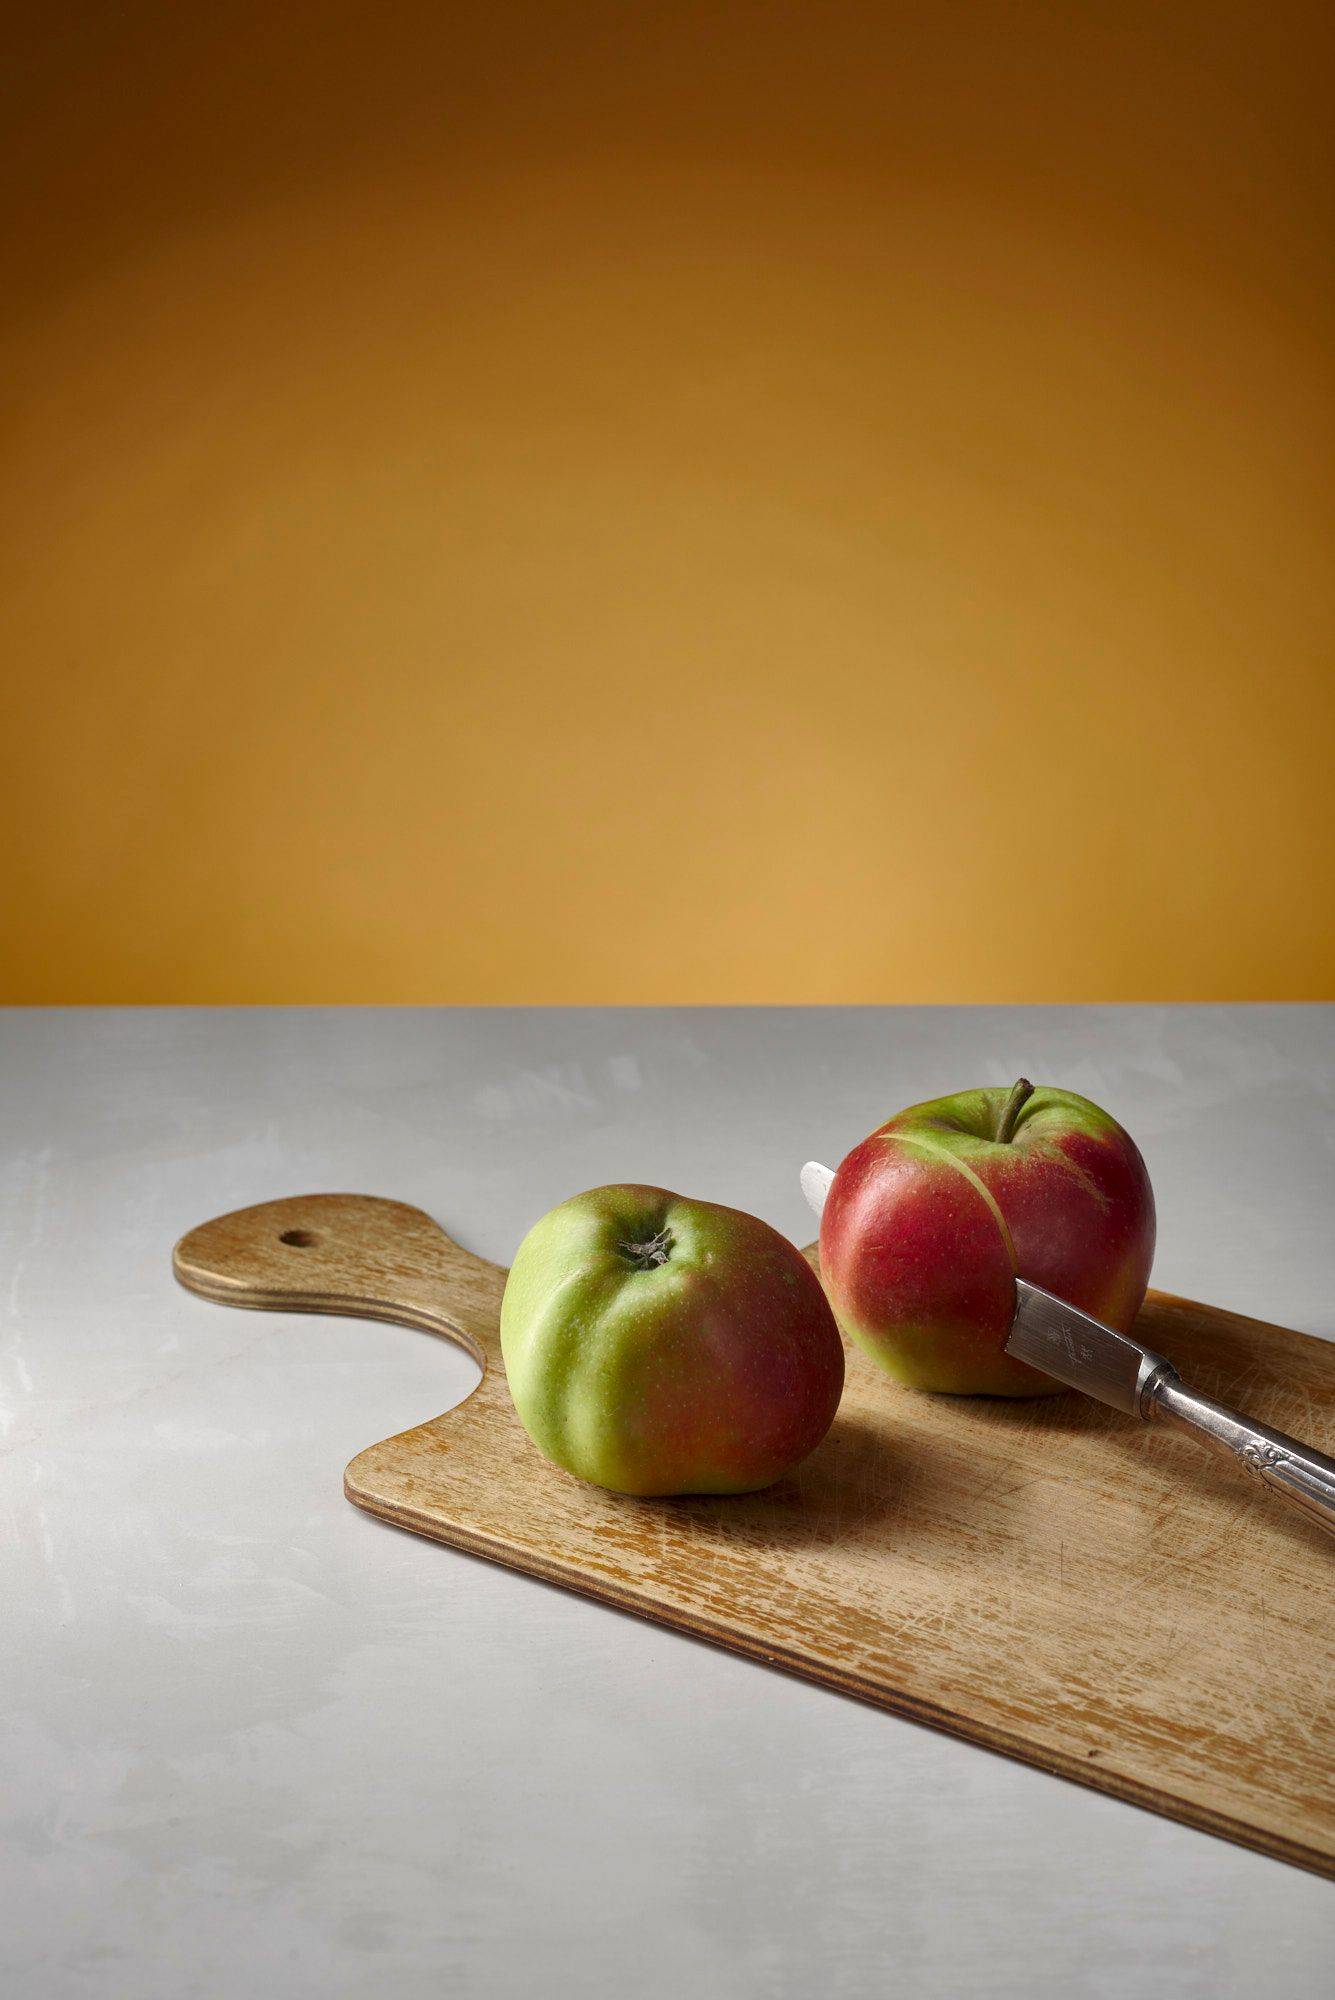 two red apples on a wooden board with white sapienstone top and yellow background